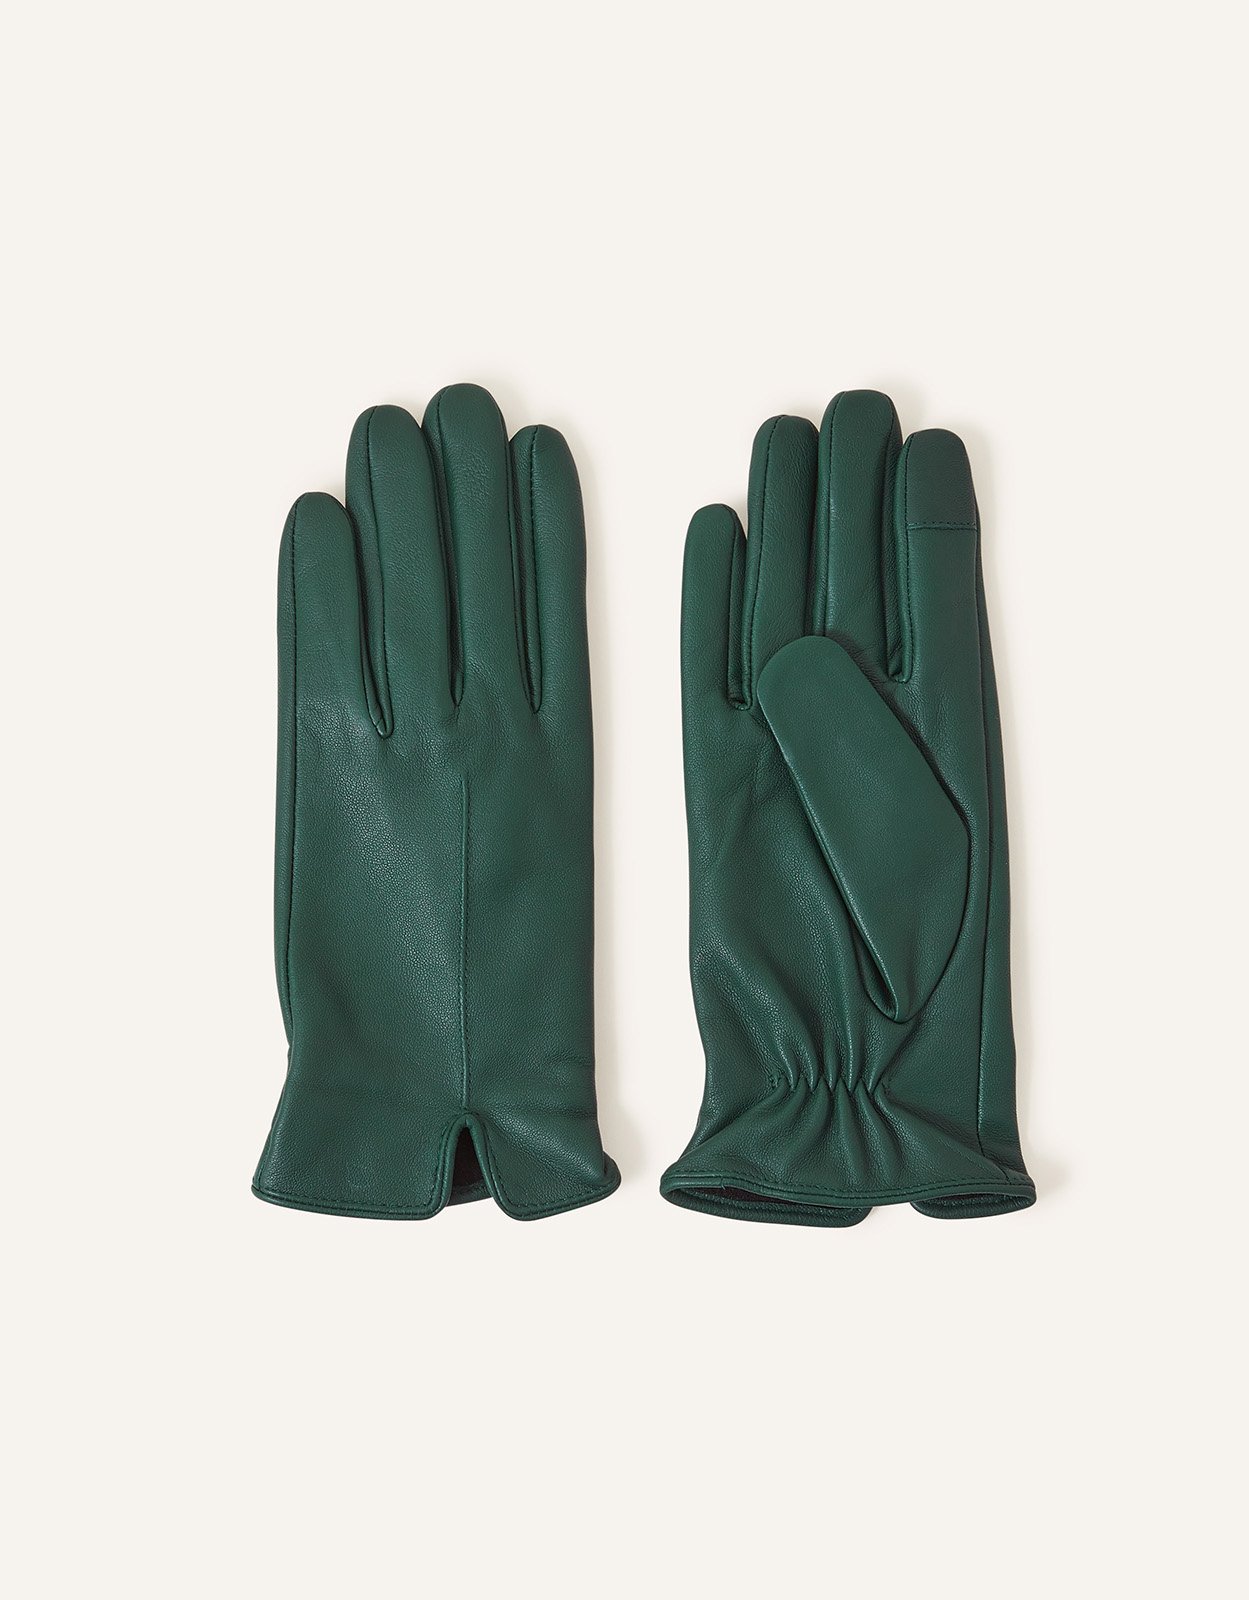 Accessorize Touchscreen Leather Gloves Green, Size: One Size